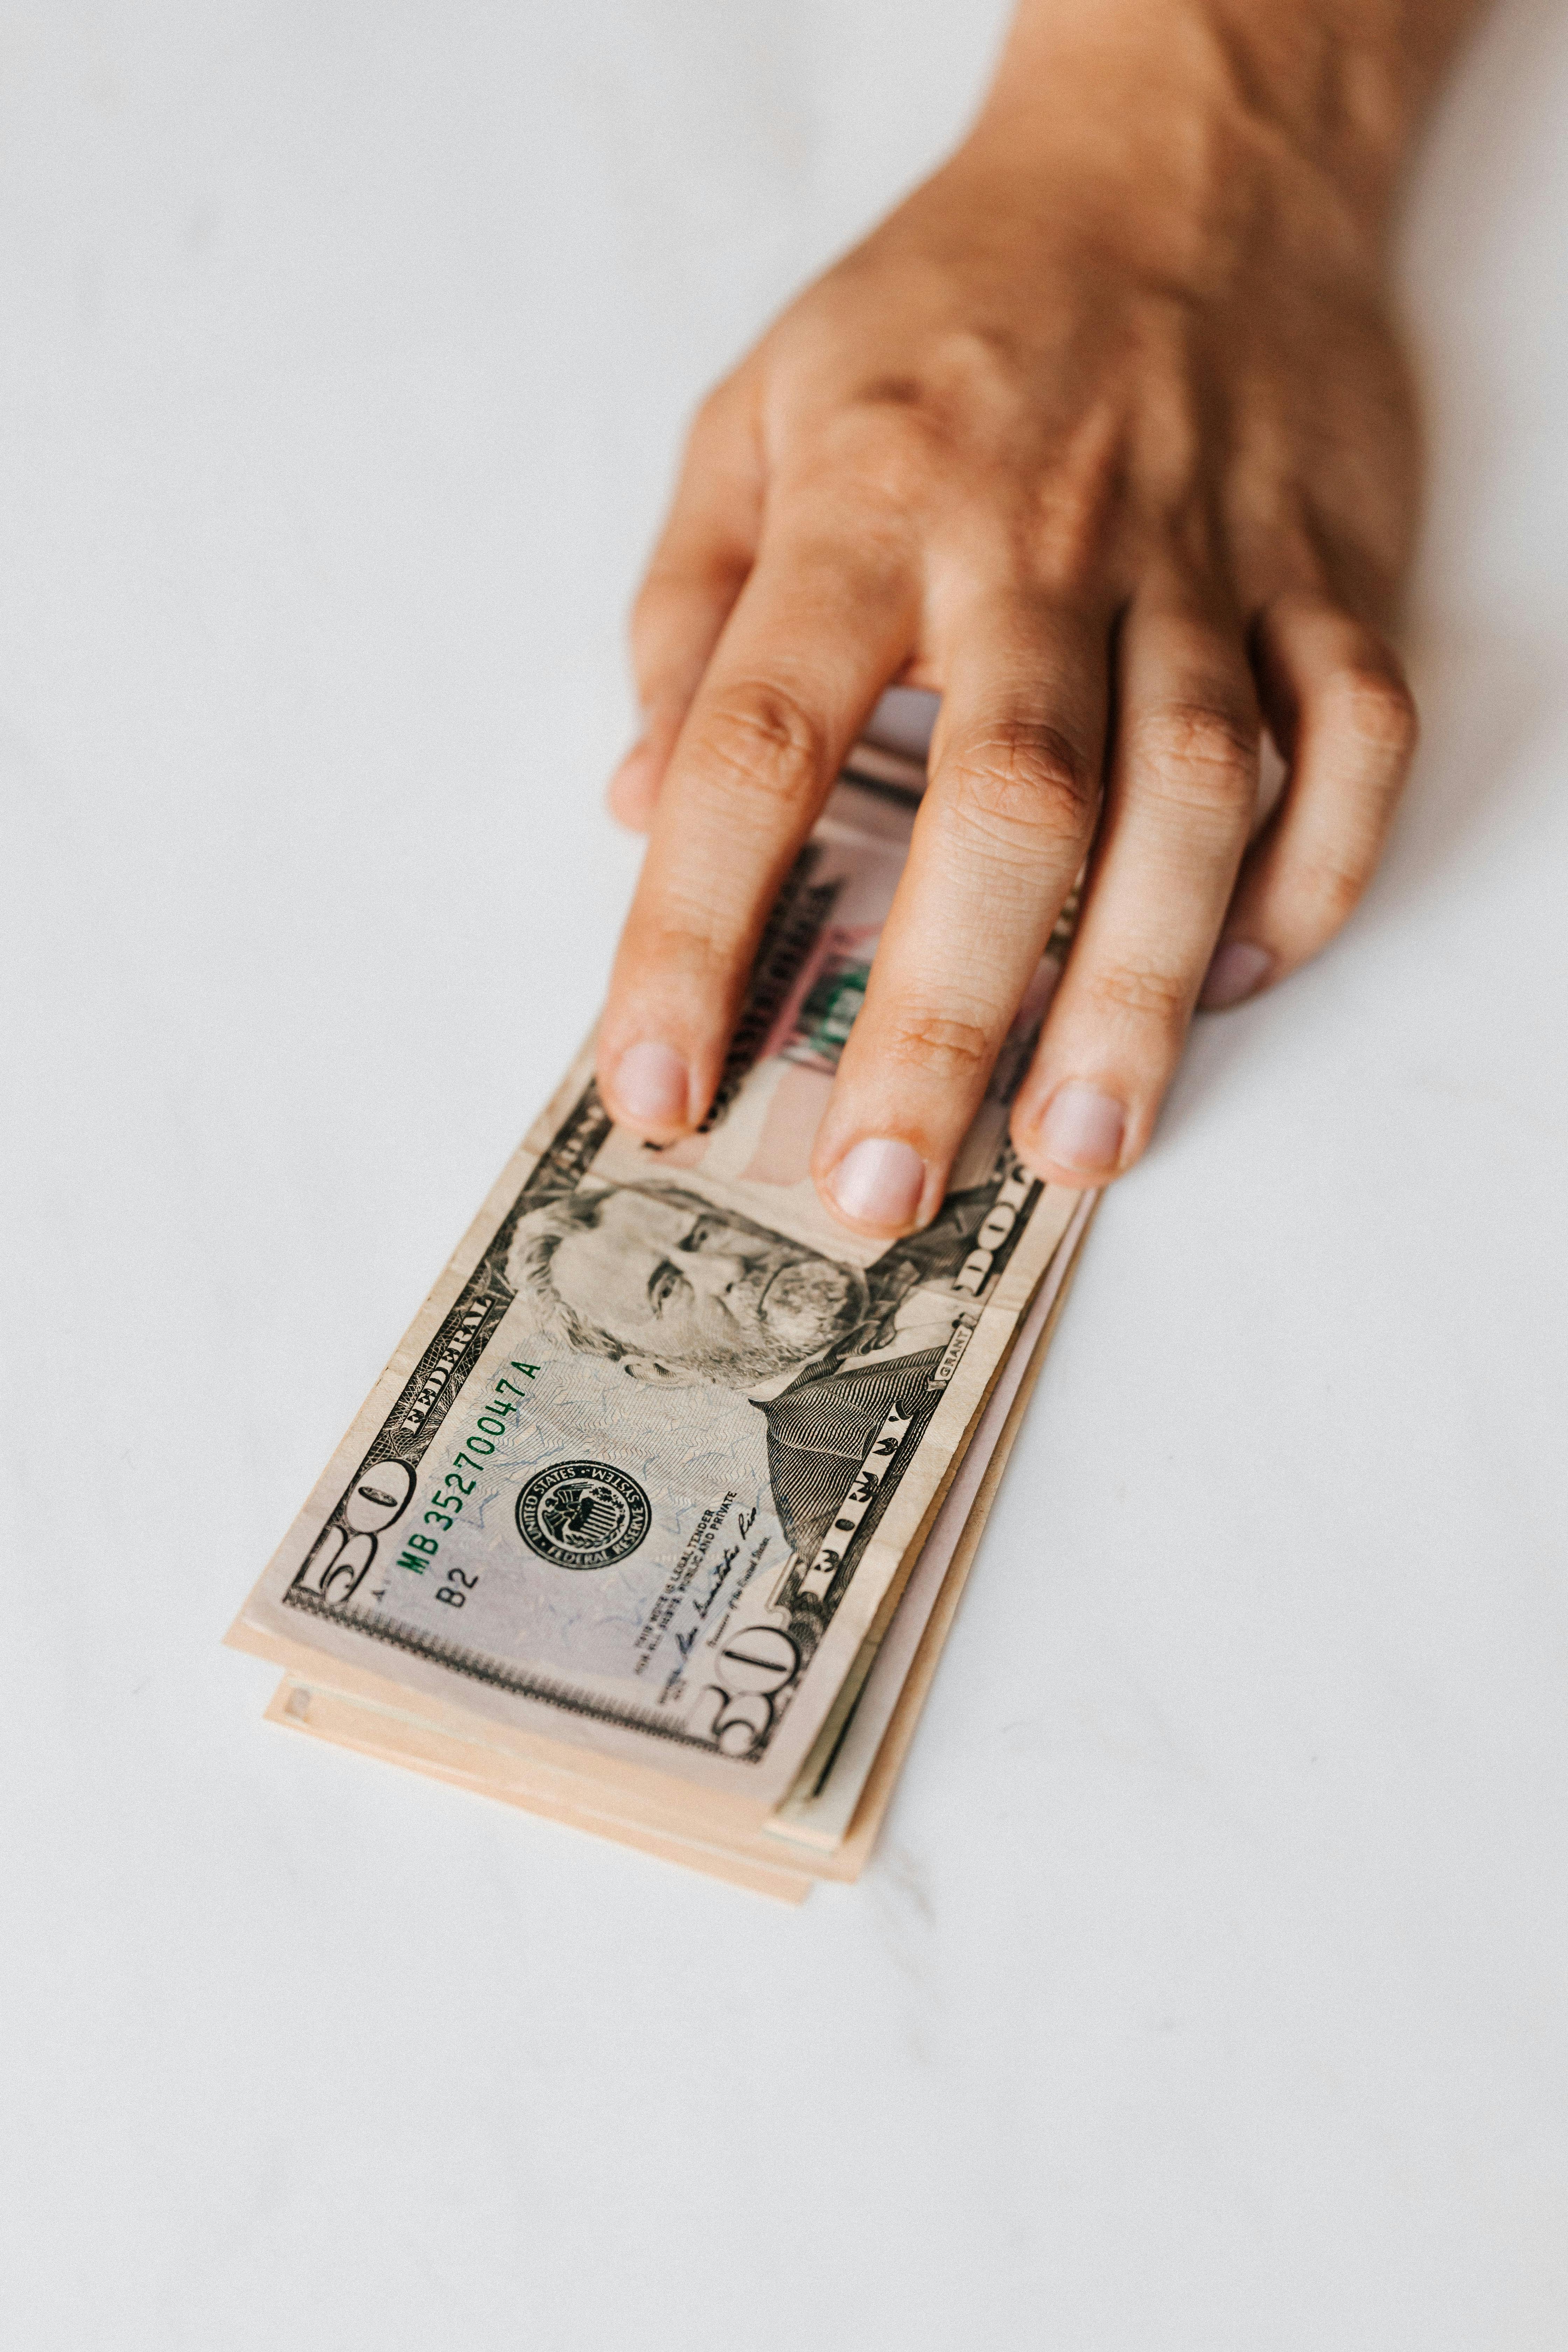 A person putting pile of paper money on table | Source: Pexels